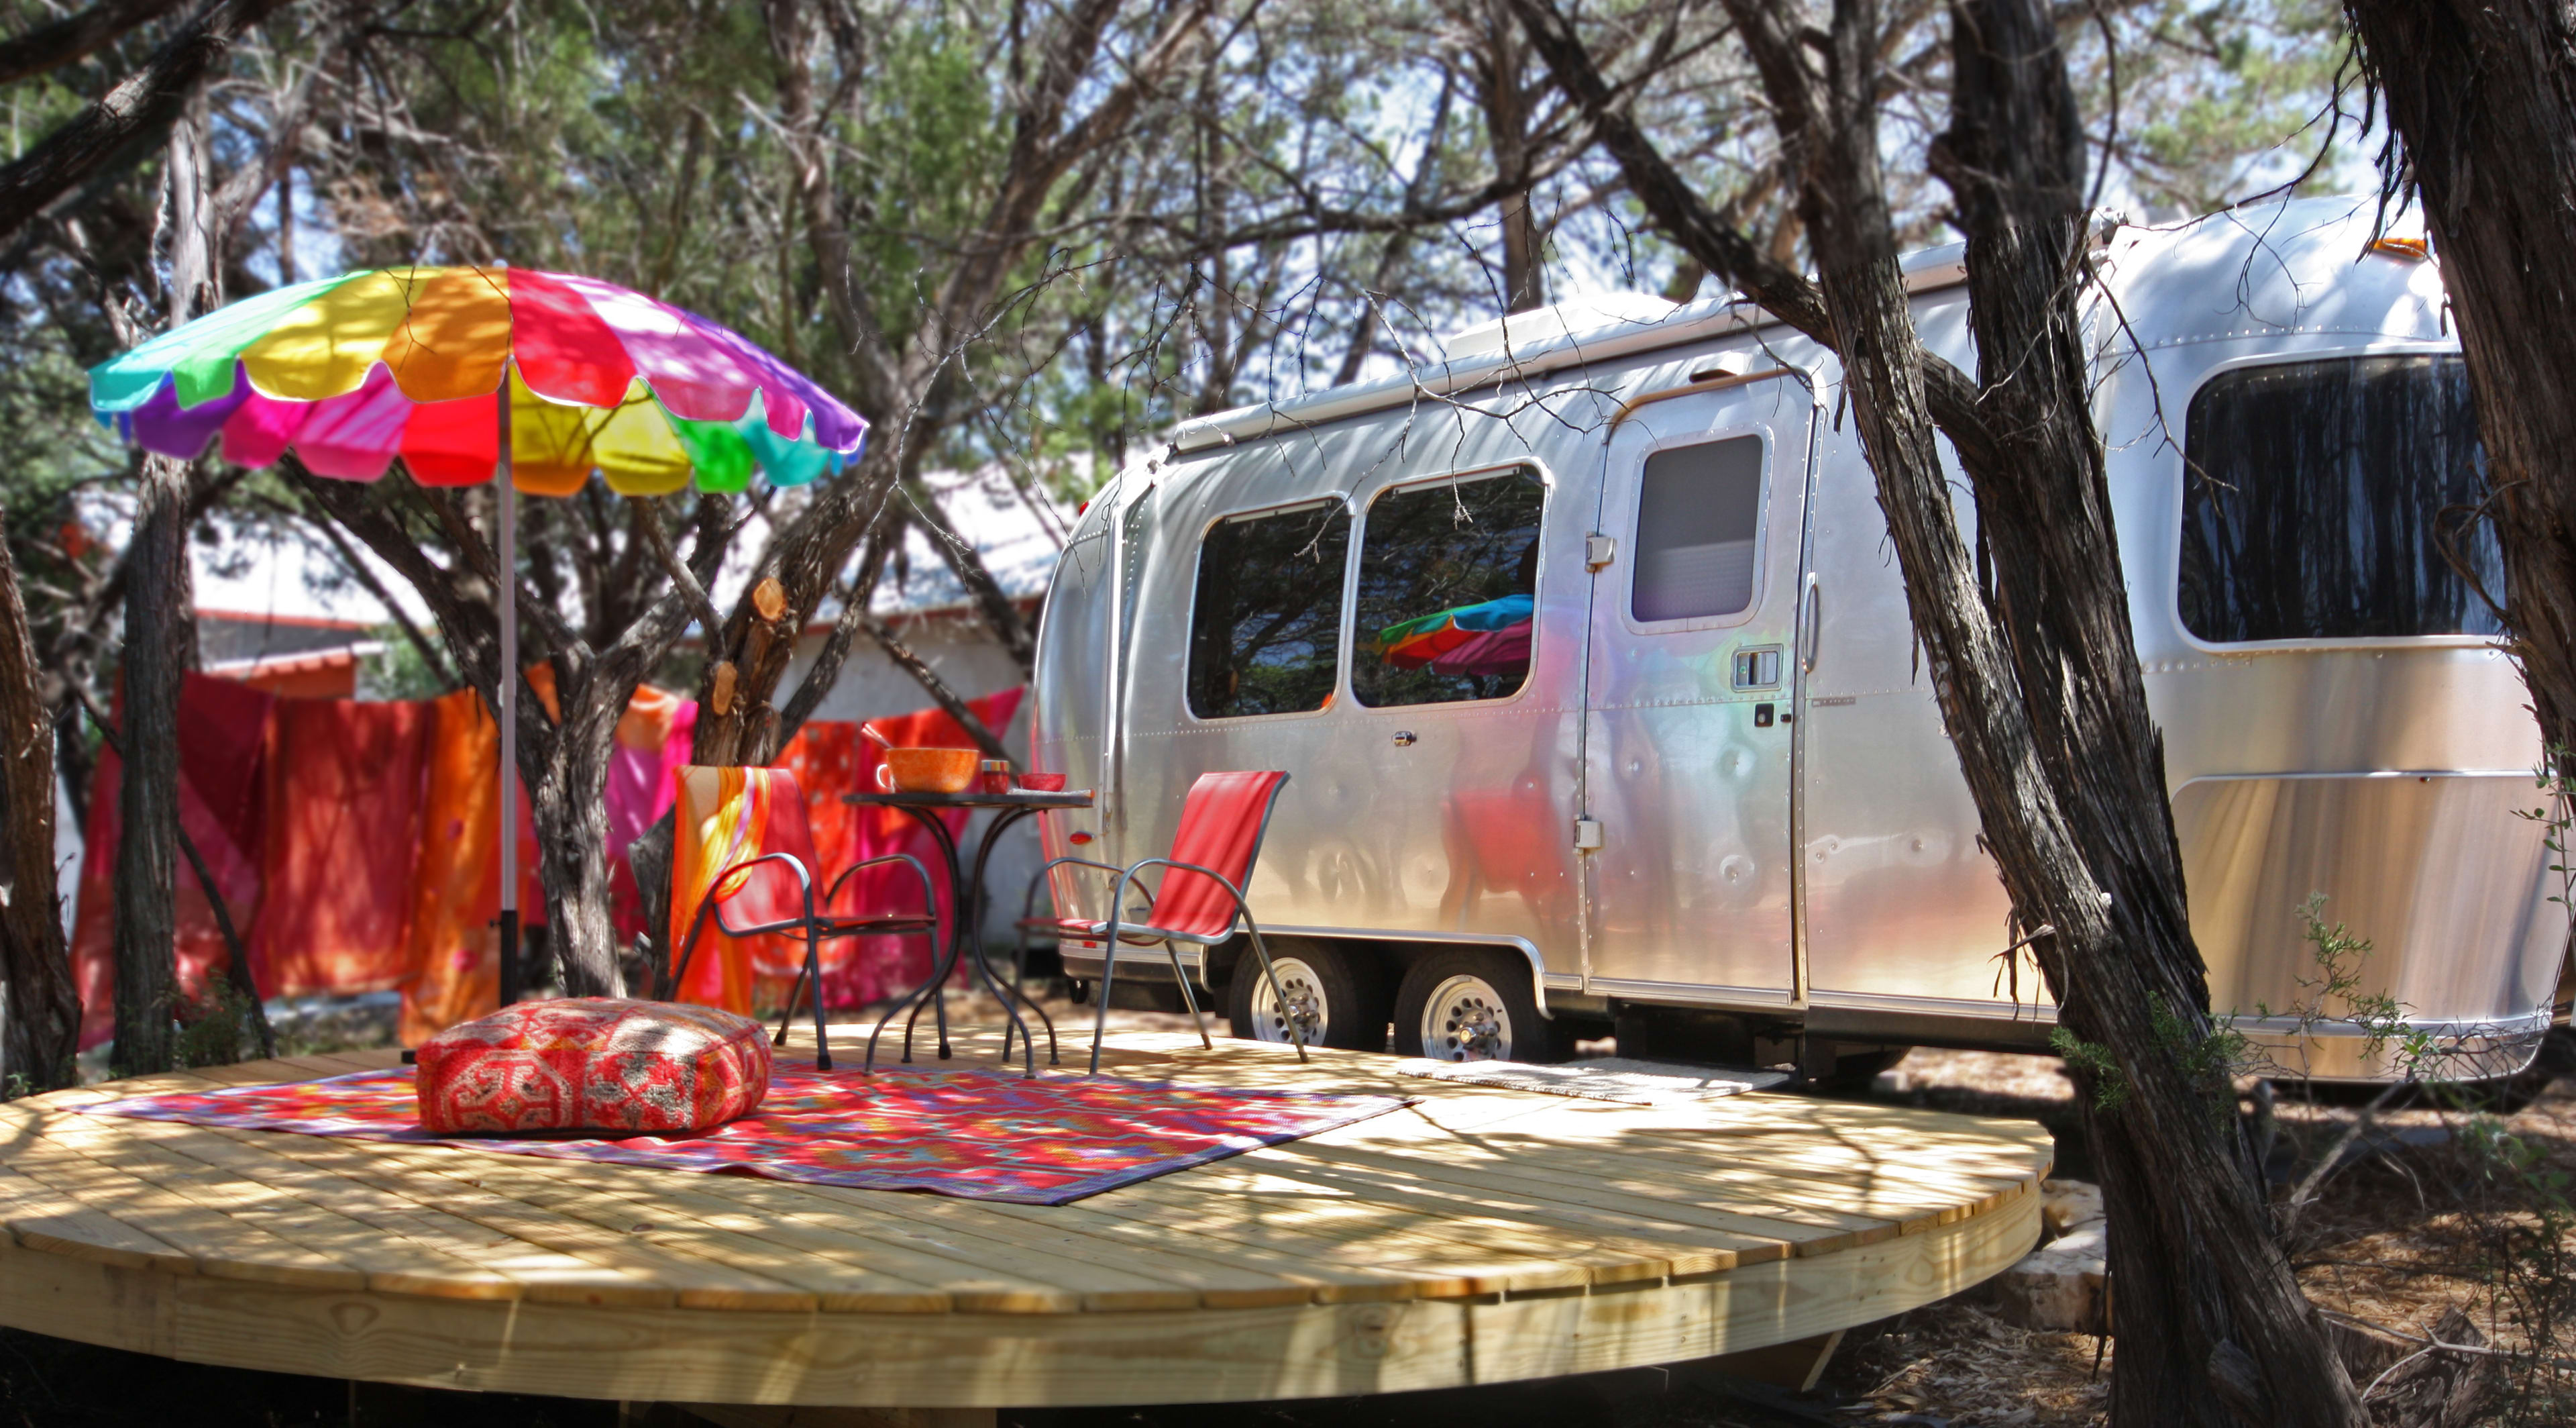 Moonbeam is one of several camping/glamping options on Round Mountain Ranch.